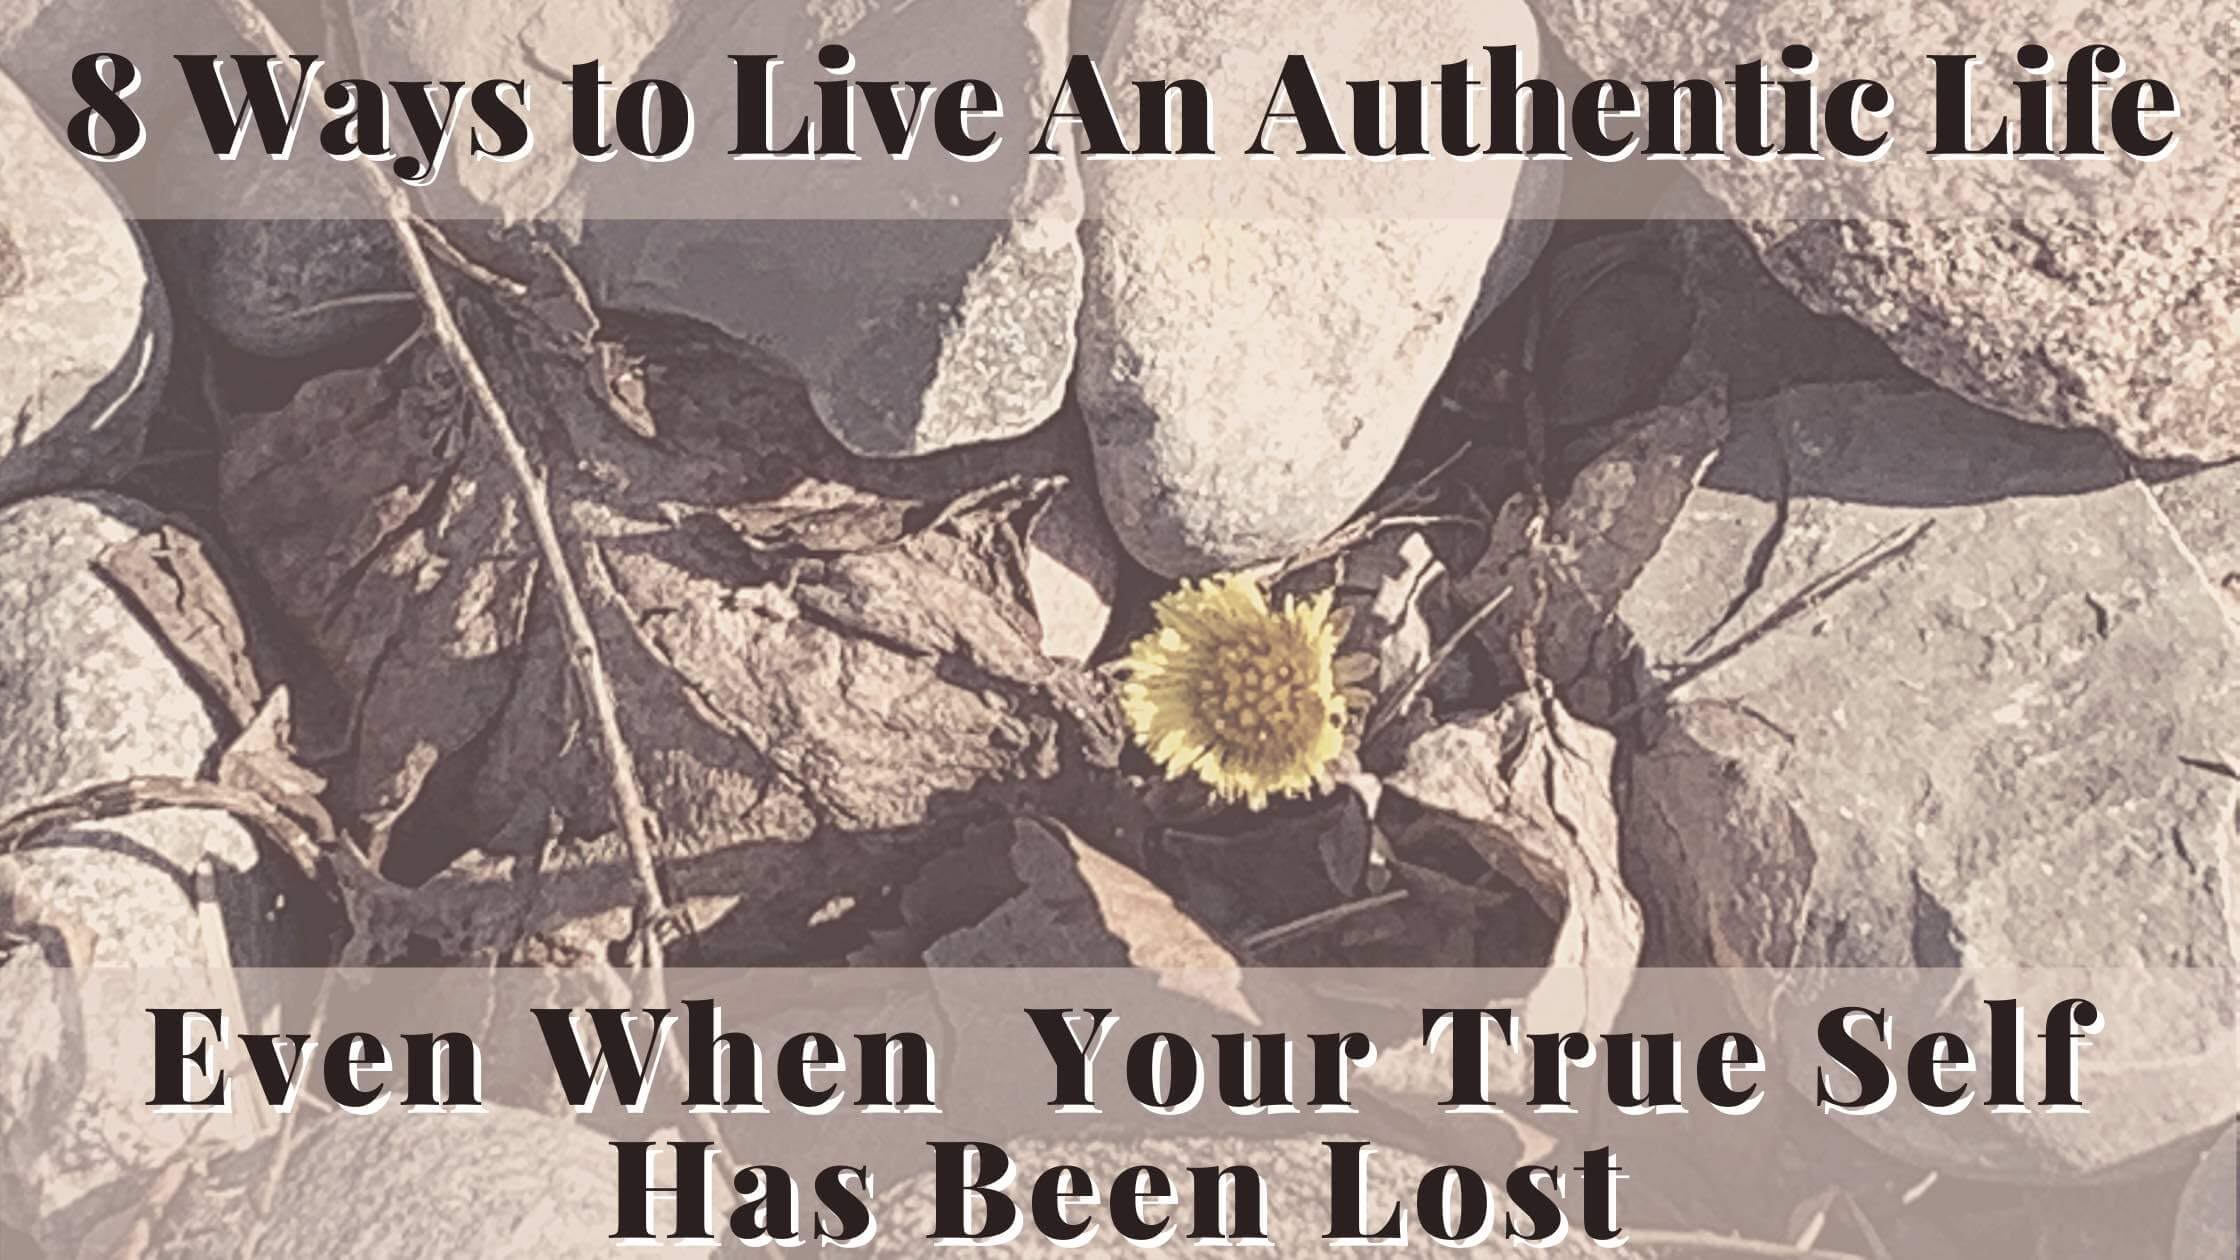 Dandelion growing in-between the rocks 8 ways to live an authentic life when your true self has been lost